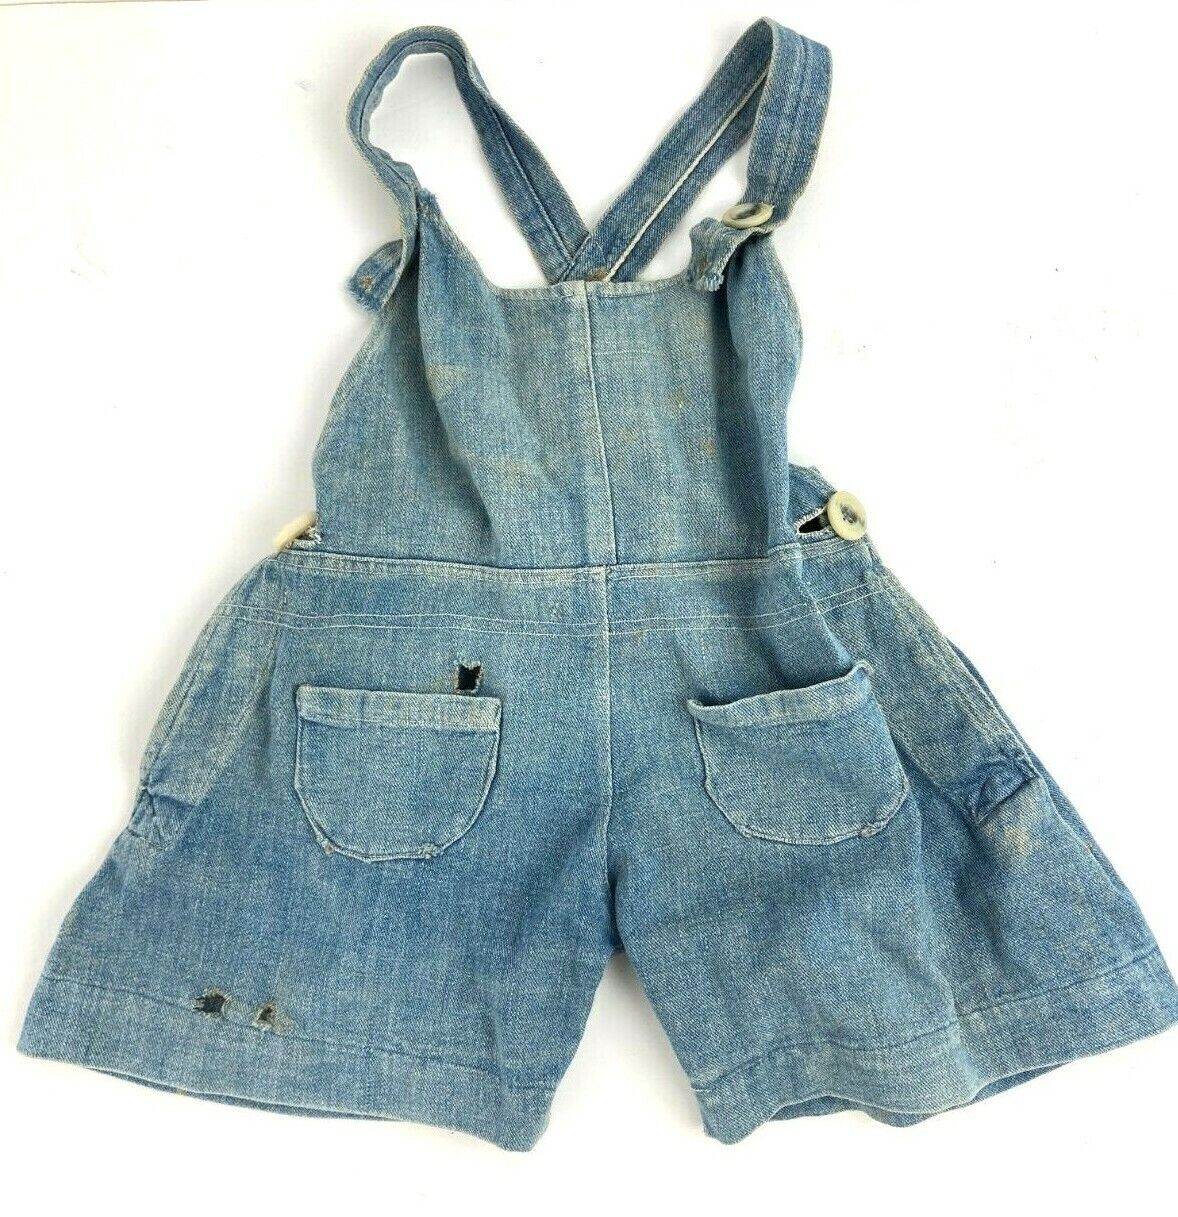 Max 80% OFF Vintage Selvedge Denim 30s-40s cheap Baby Jean Overalls Homemade